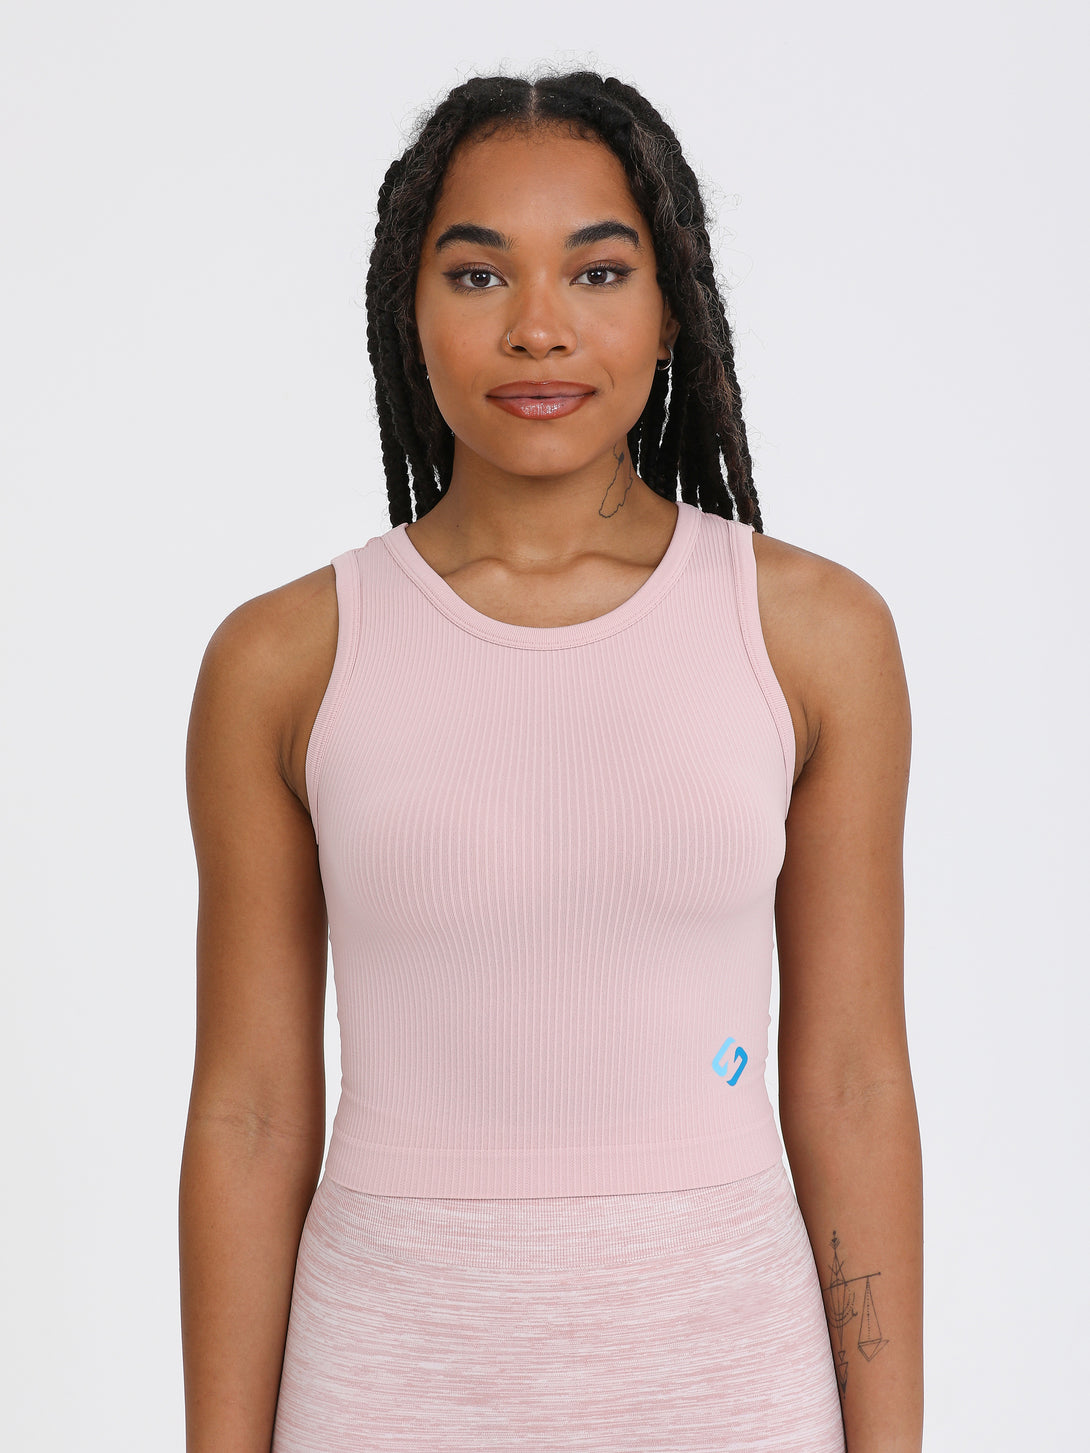 A Woman Wearing Pale Mauve Color All-Day Sleeveless Strapped Crop Top